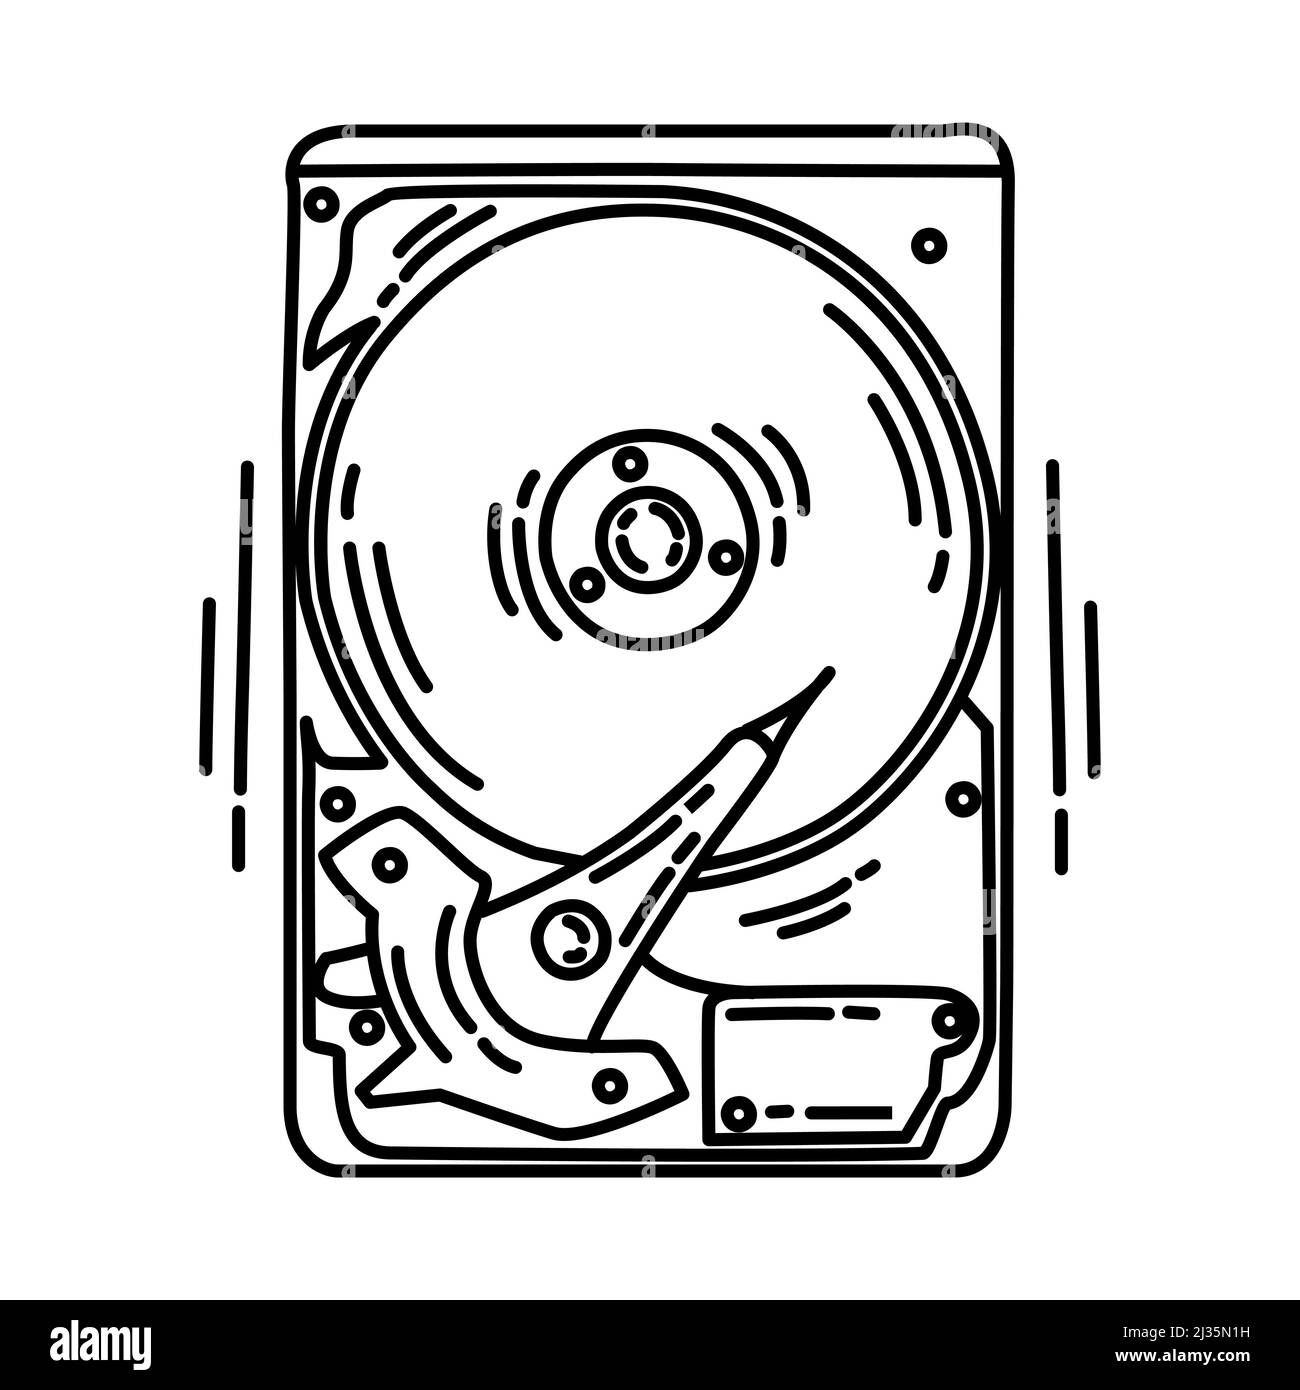 Hardisk External Part of Computer Accessories and Hardware Hand Drawn Icon Set Vector. Stock Vector